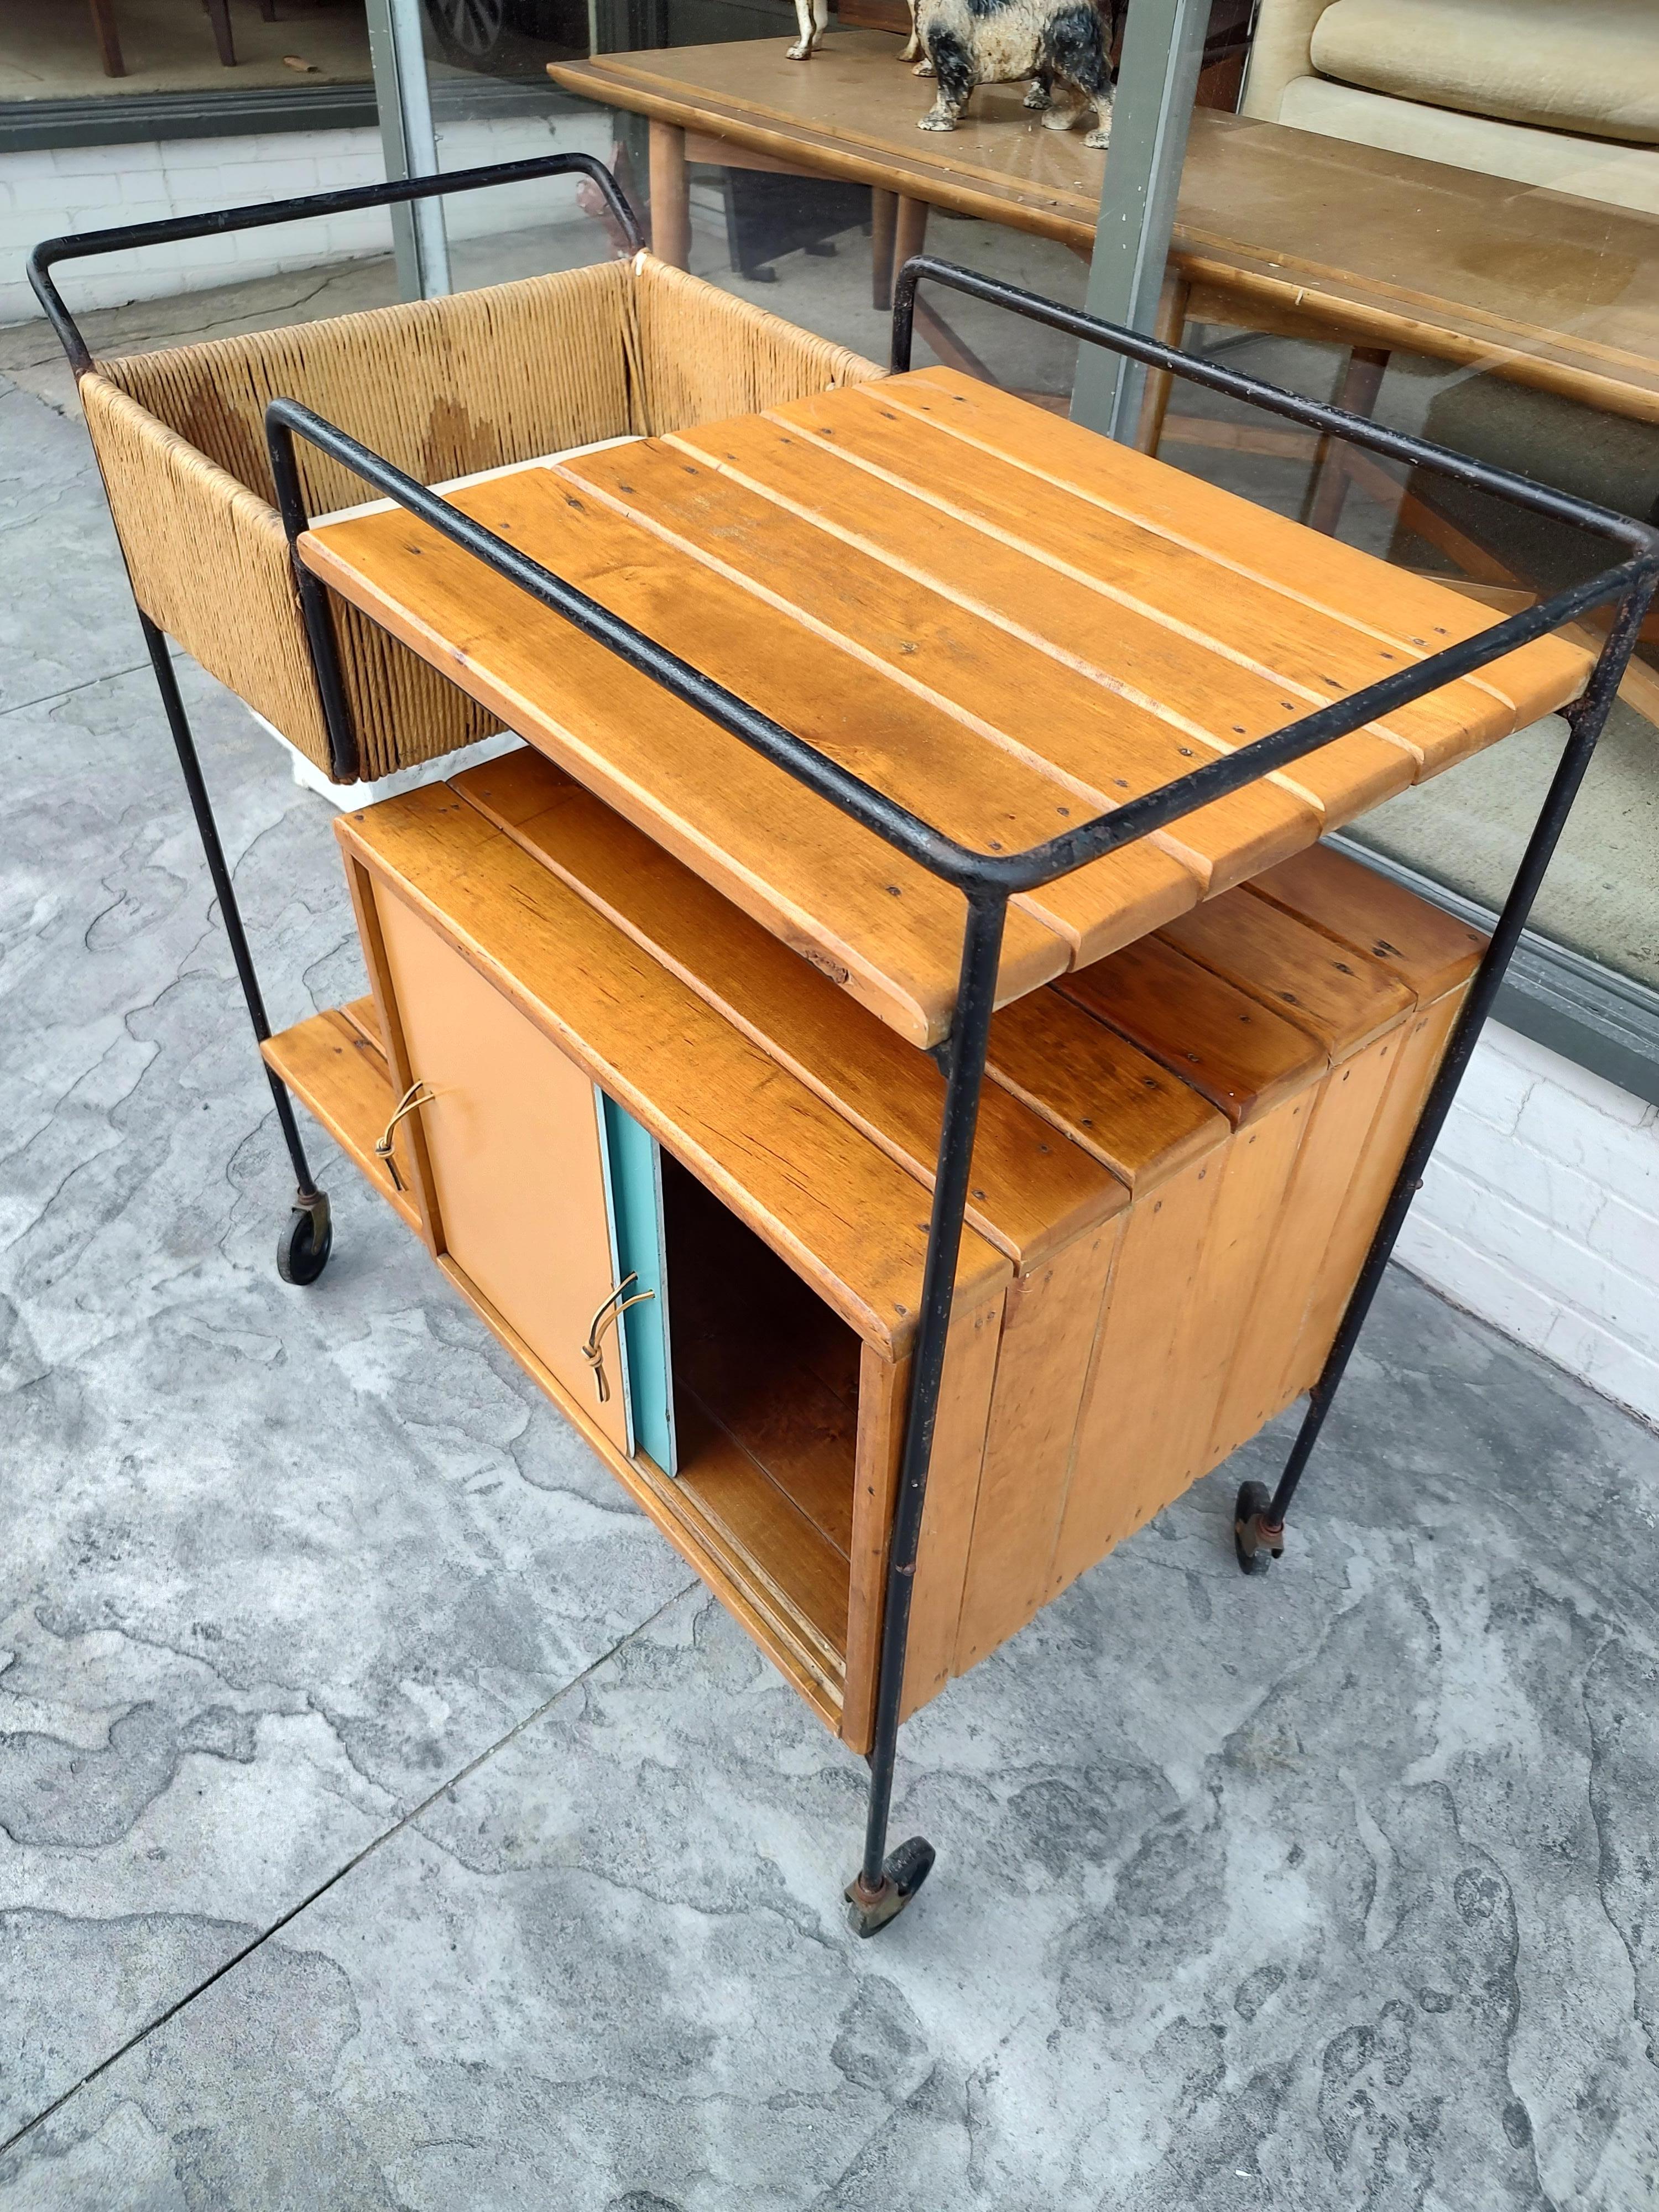 Fabulous bar cart by Arthur Umanoff for Raymor. Hand forged iron with Raffia and Maple. Sliding doors on both sides with new leather pulls. In excellent vintage condition with minimal wear.